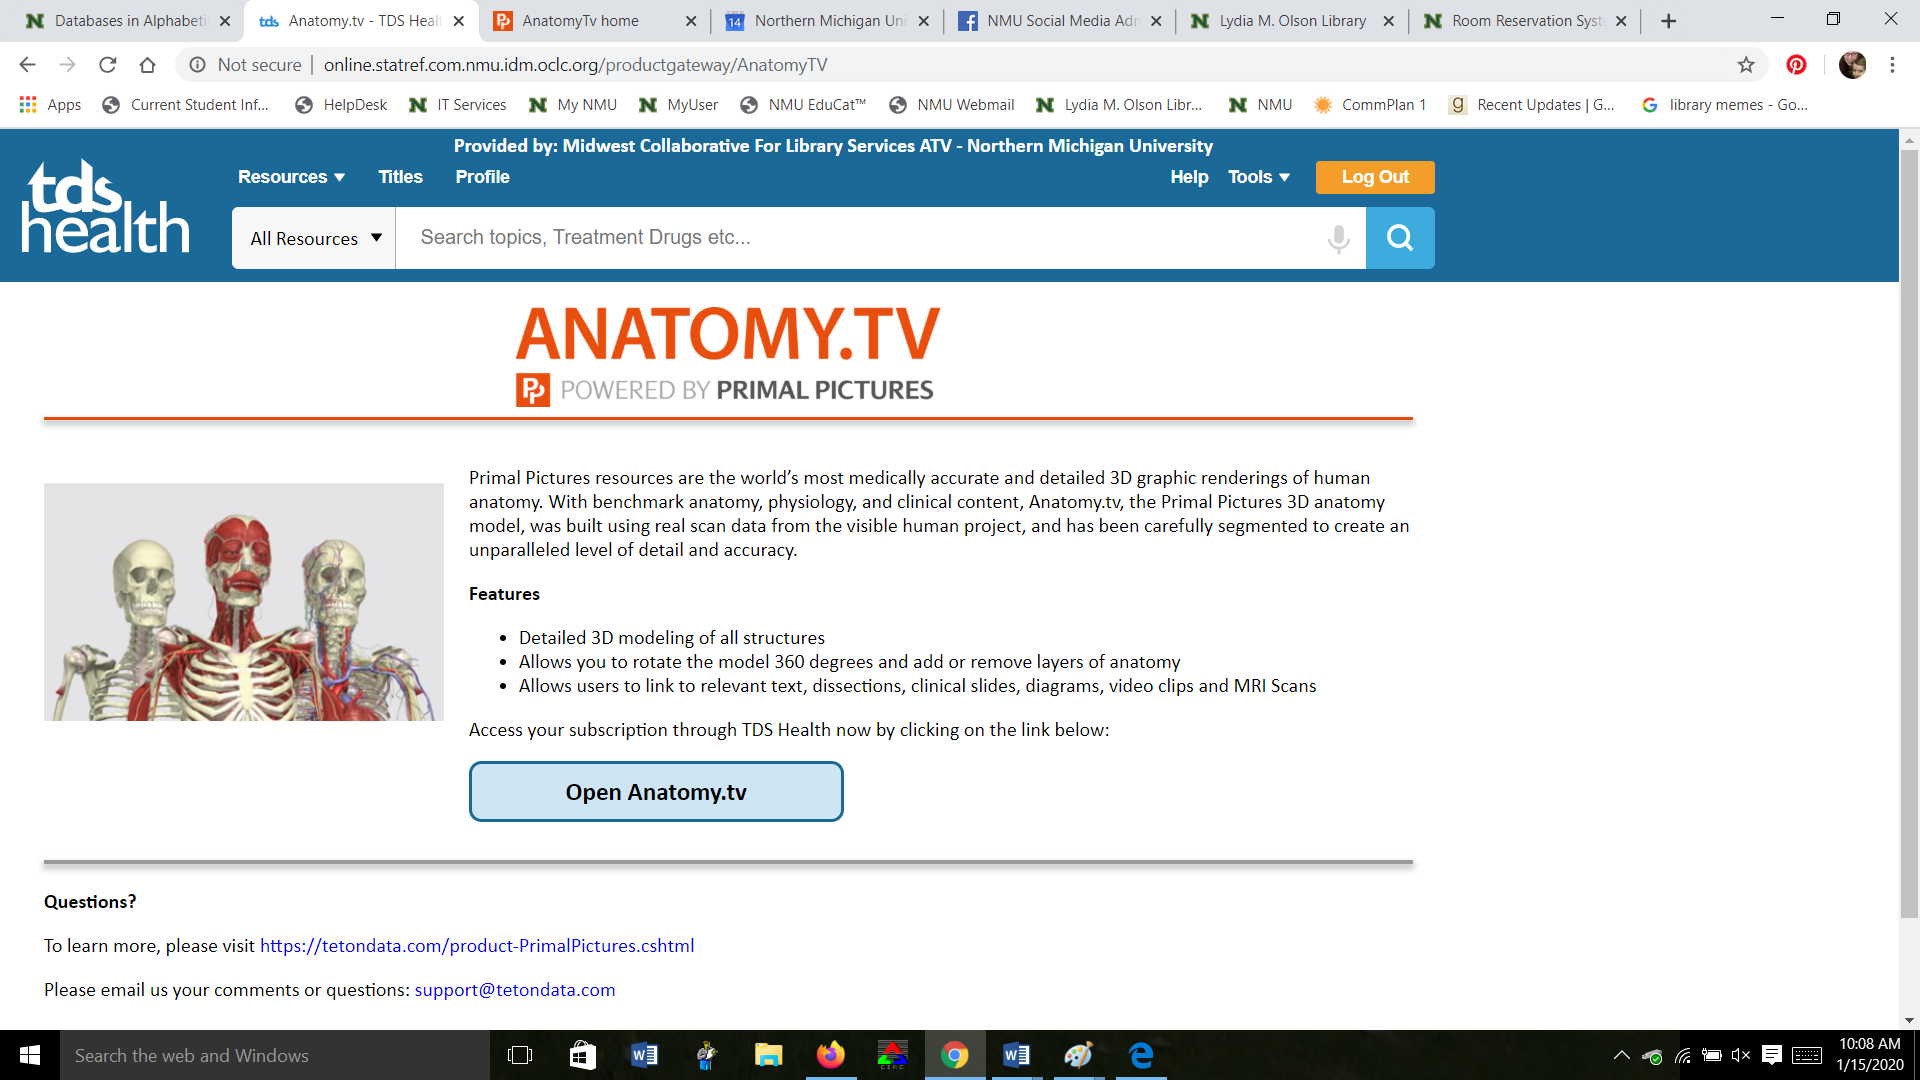 Landing Page for Anatomy.TV 